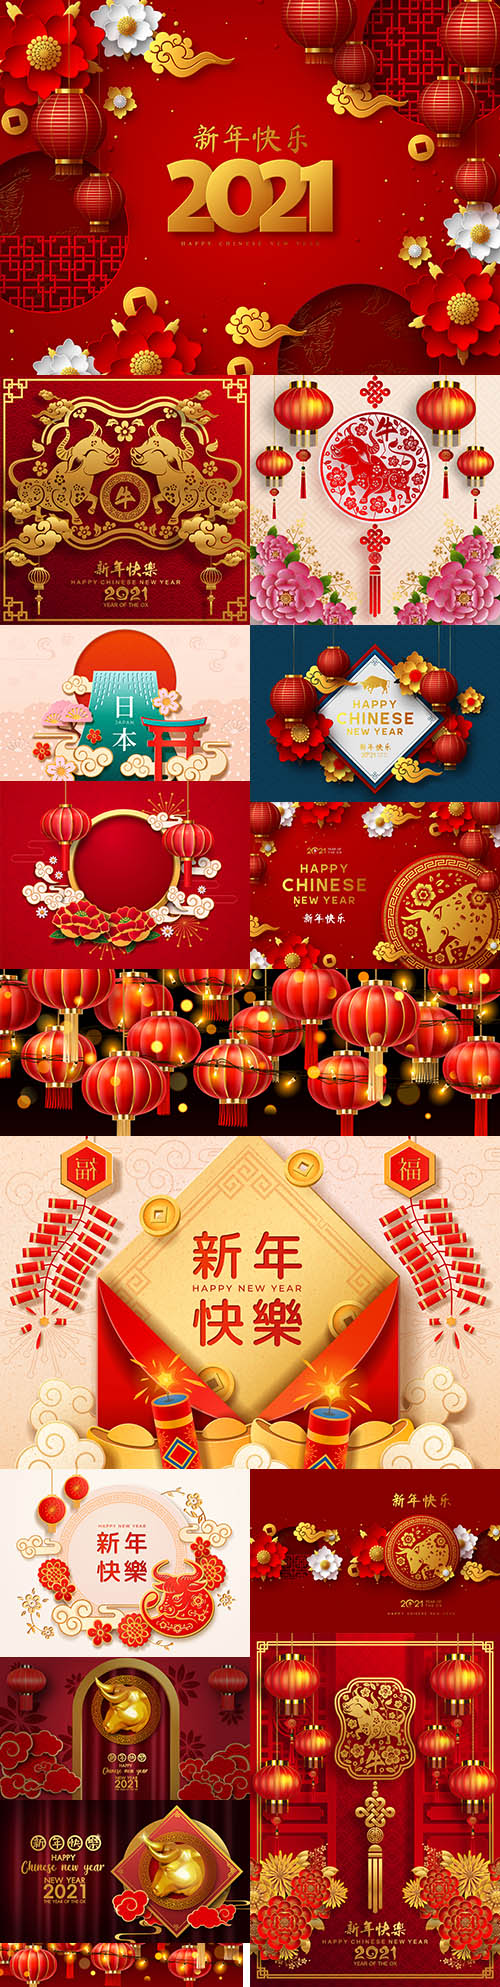 Chinese New Year 2021 with decorative flowers and lights
